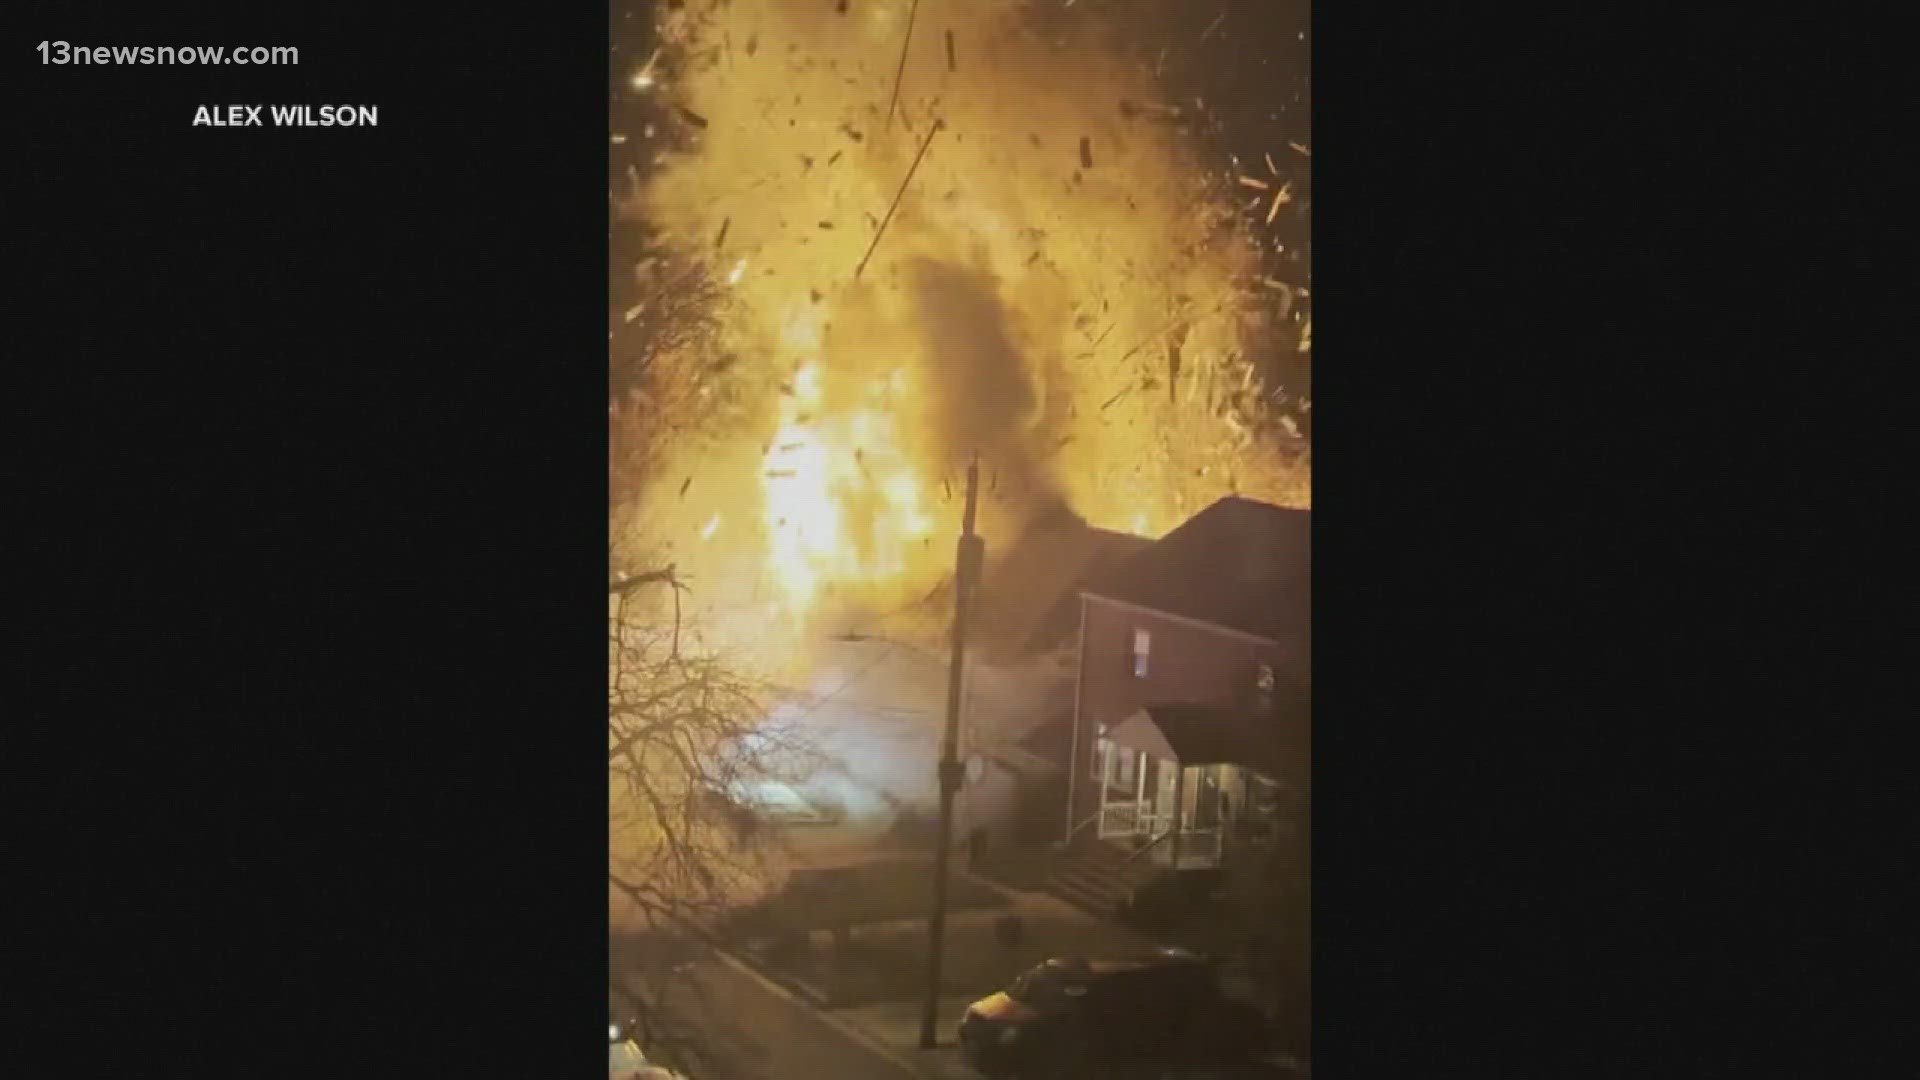 This video from social media shows the explosion. Police were called to the scene beforehand and received a search warrant but the suspect would not come outside.